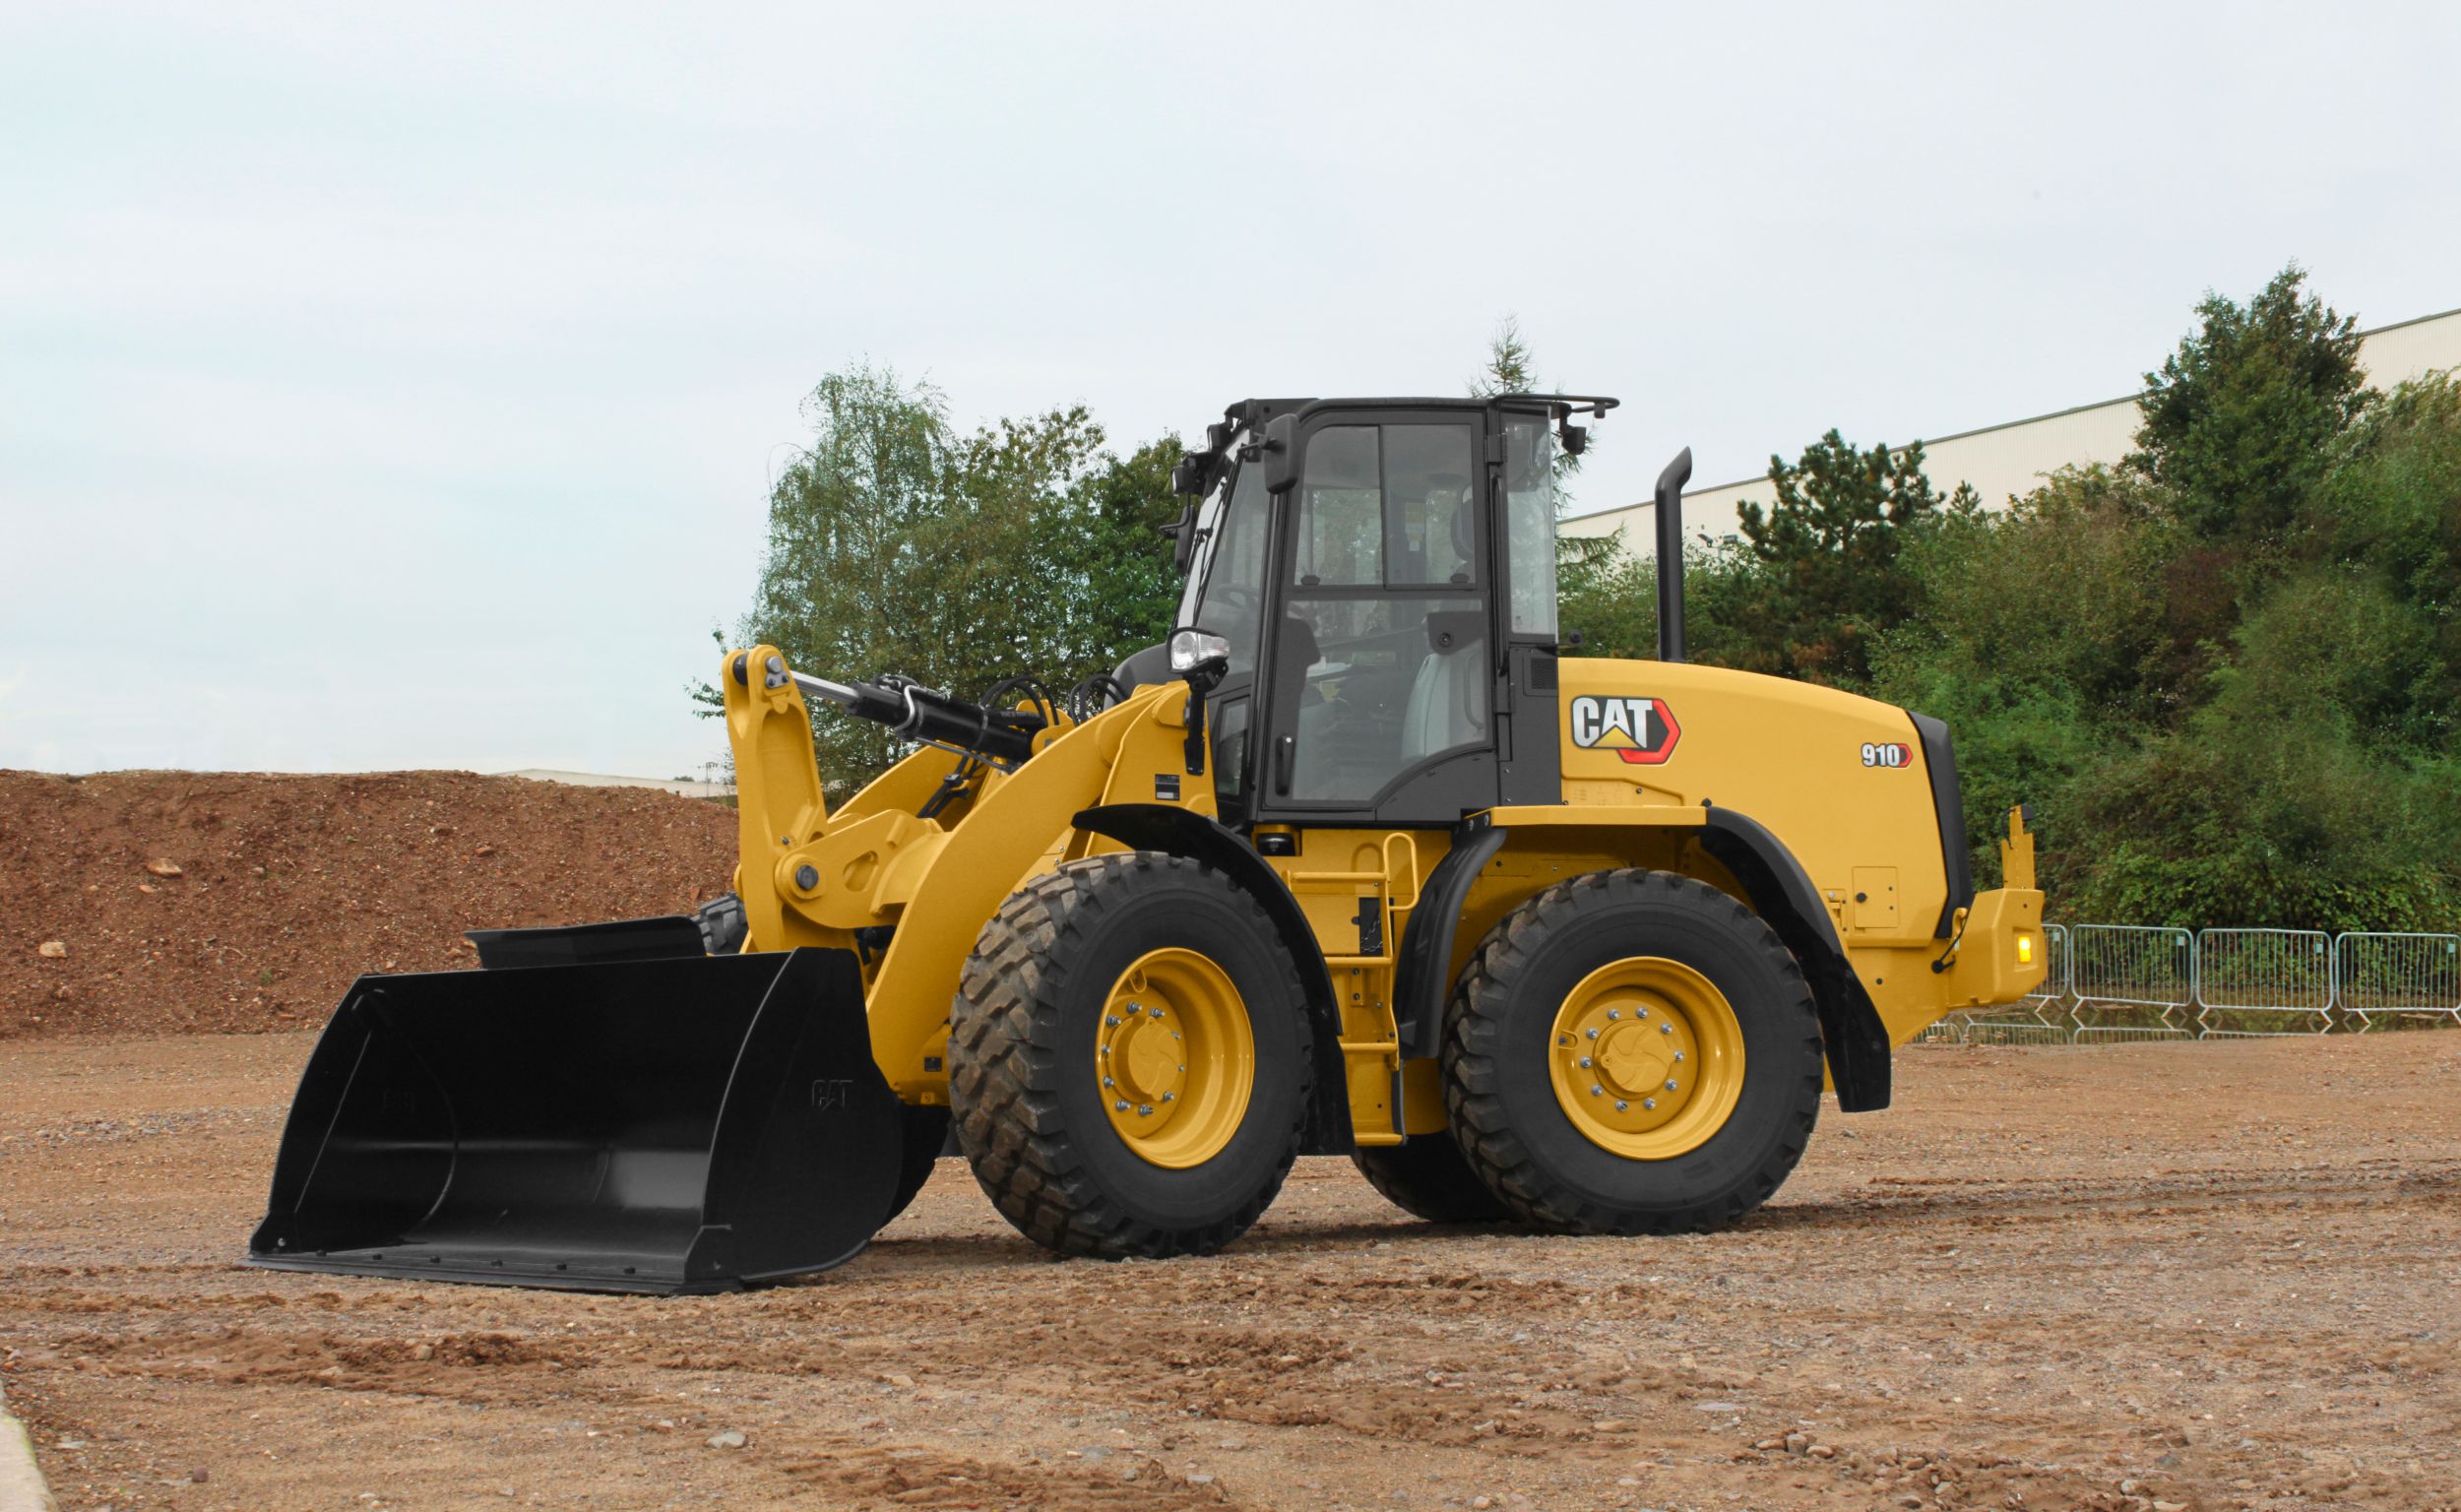 The 910 Compact Wheel Loader.